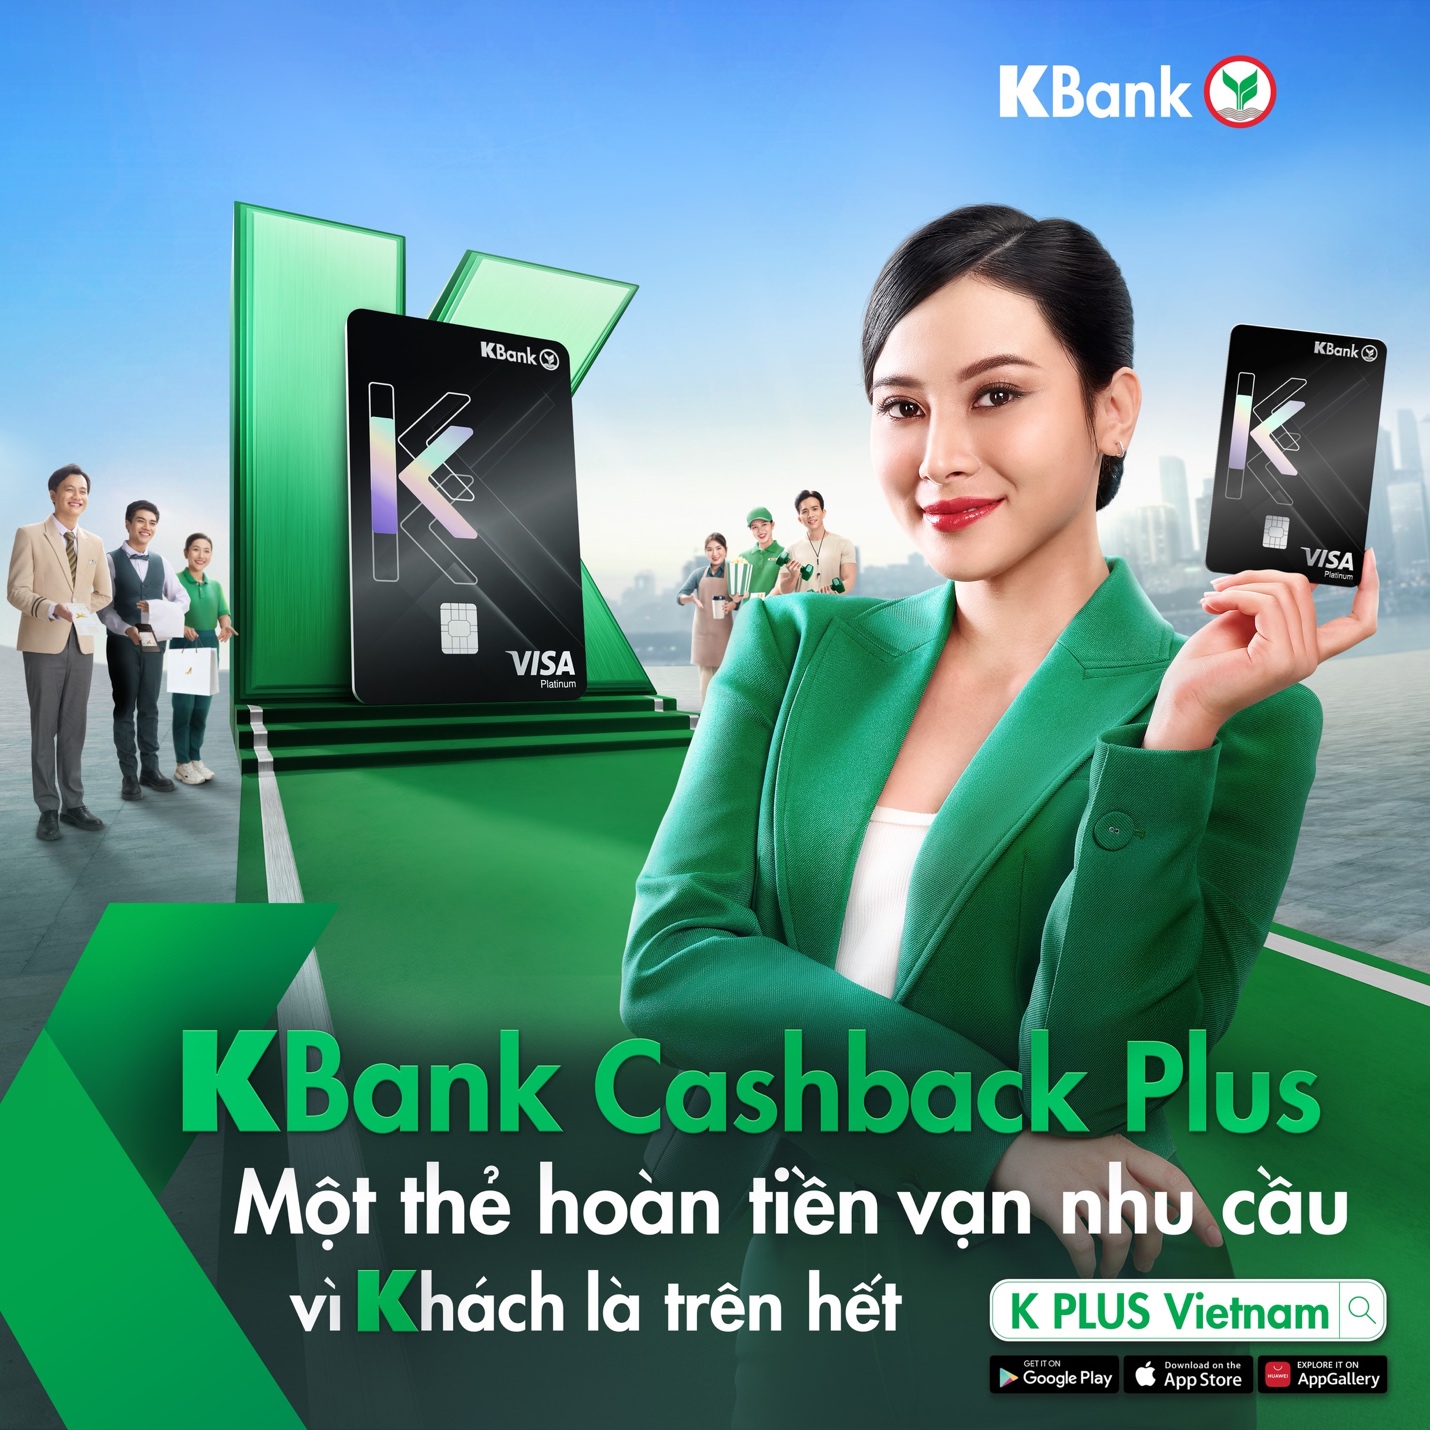 “For Customers First” - Business Philosophy Brought to Vietnam โดย KBank - รูปภาพที่ 2